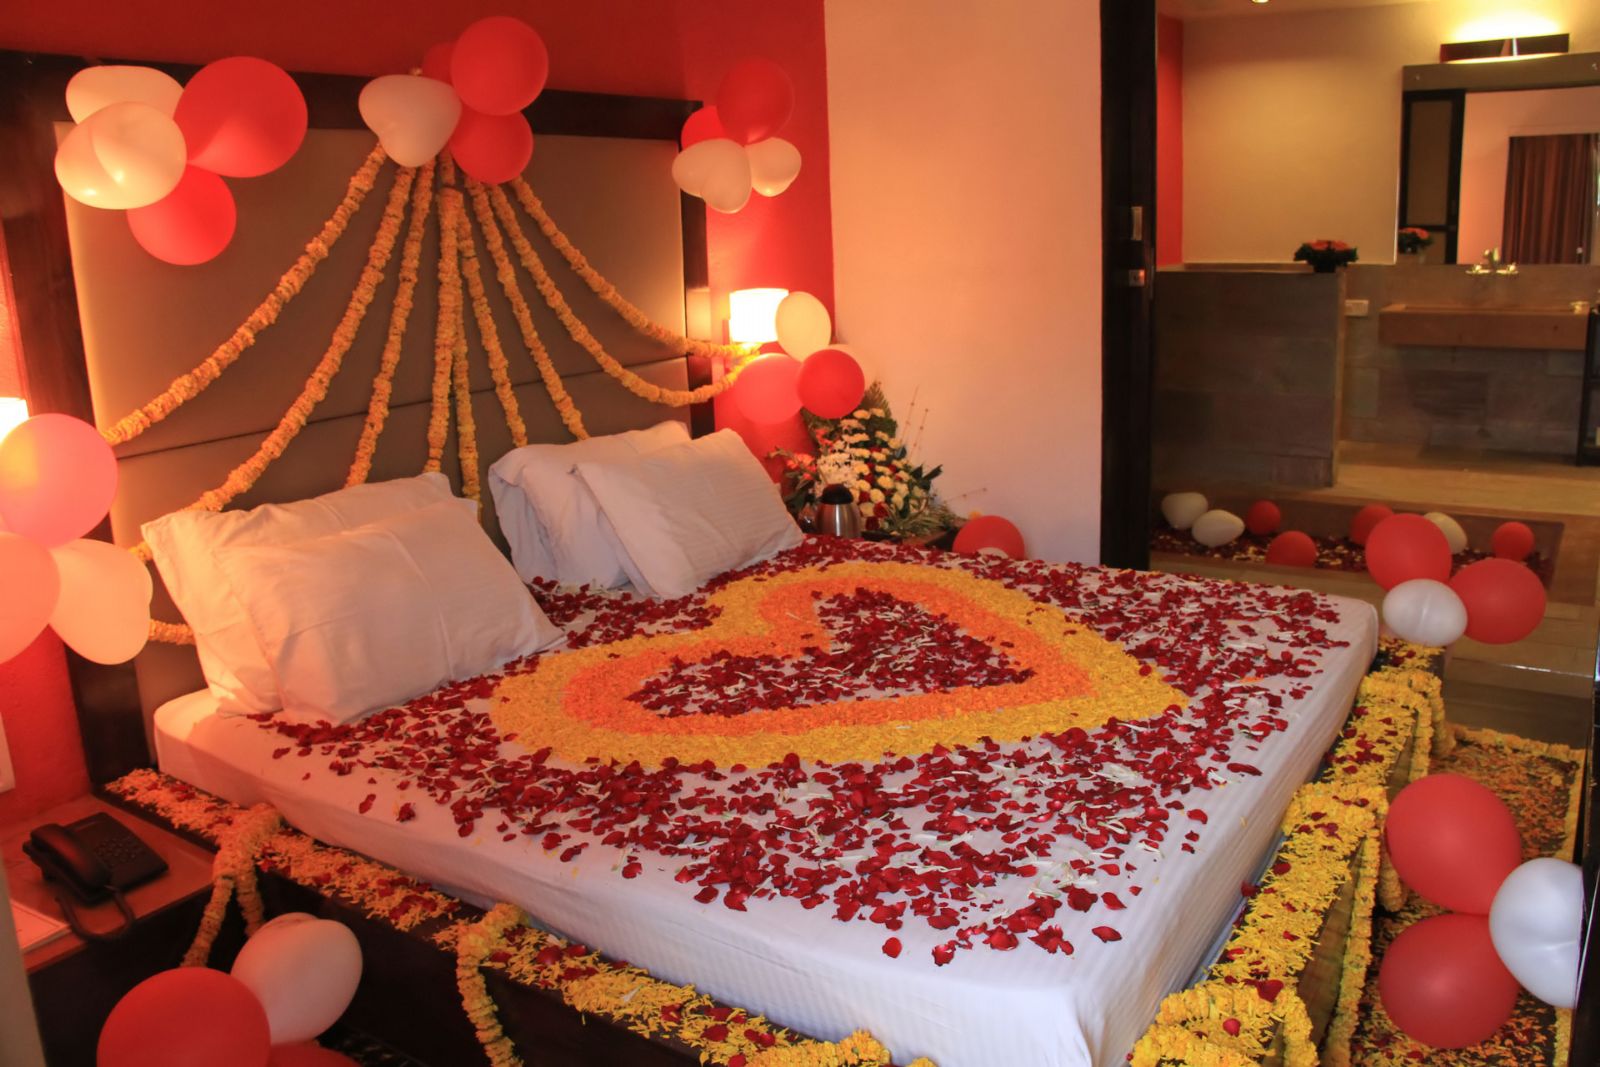 Tantalize your Lover with Tasty Bedroom Treats